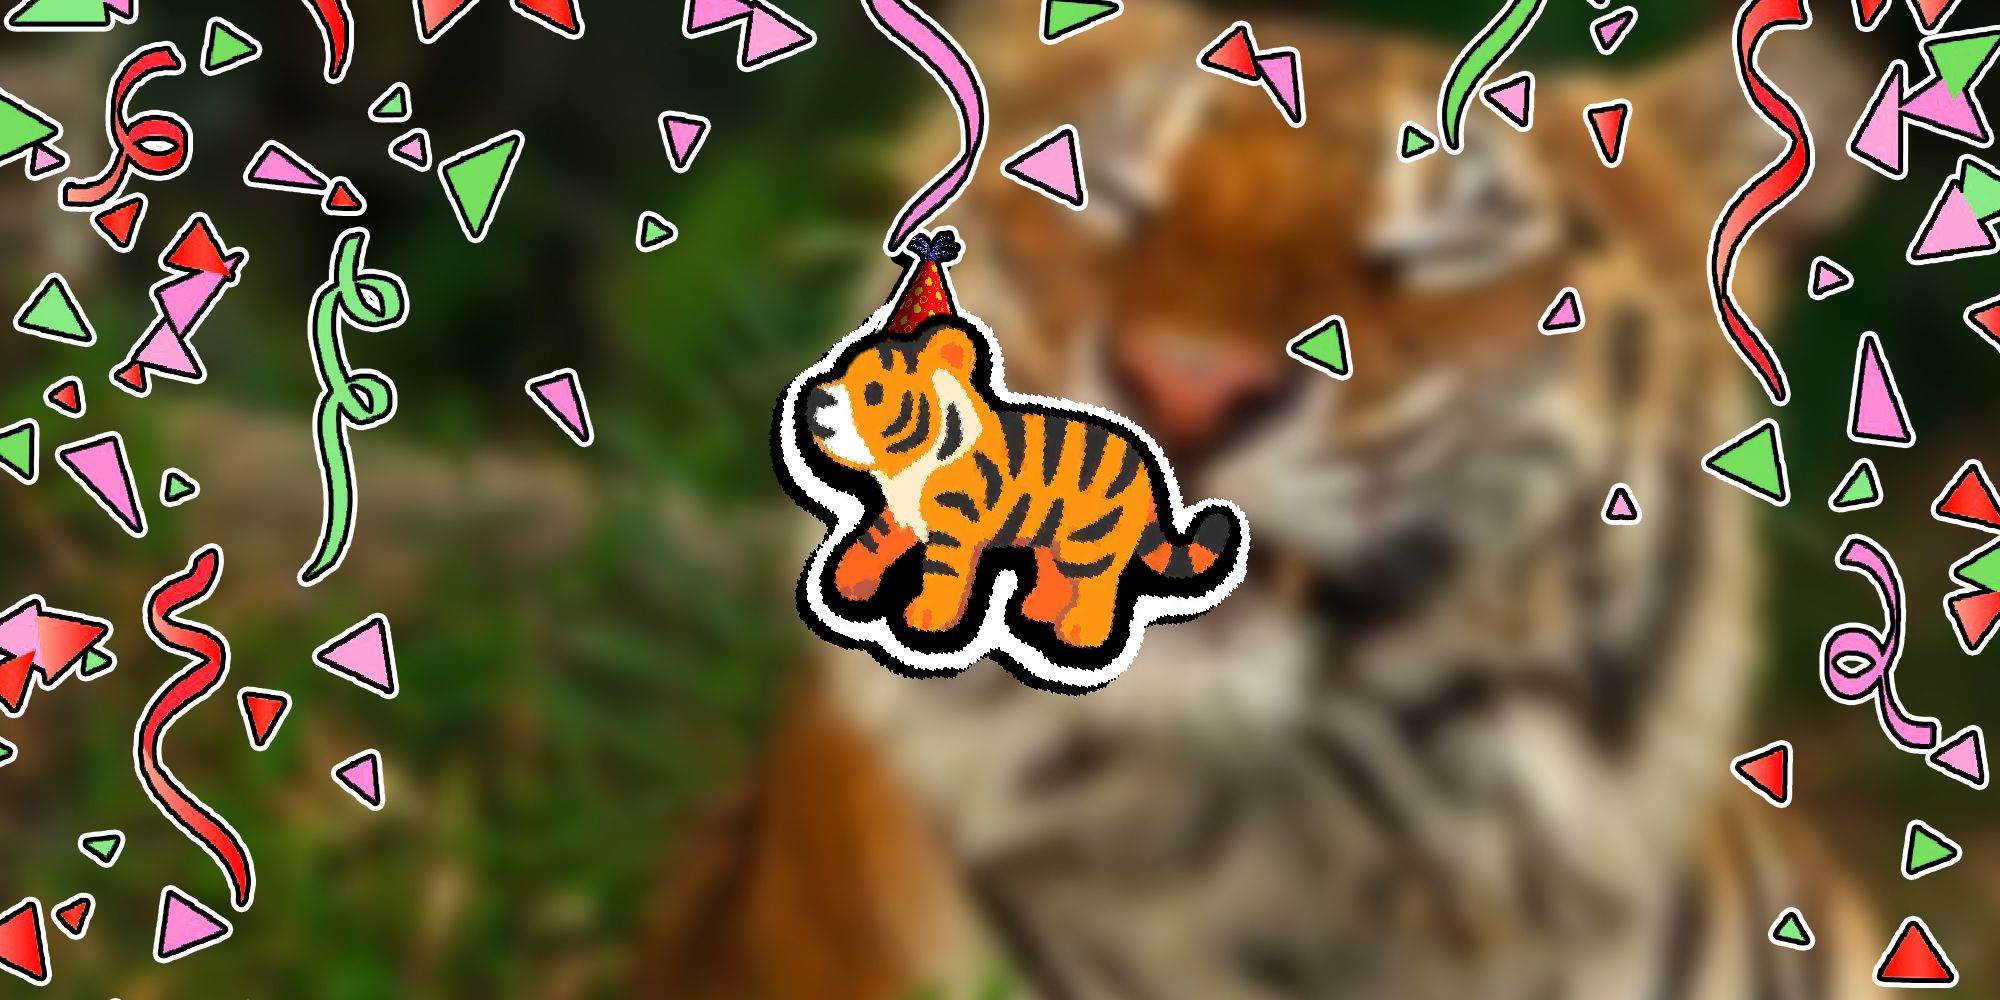 Super Auto Pets - PNG Of Tiger Pet Overlaid On Image Of Tiger And Party Celebrations